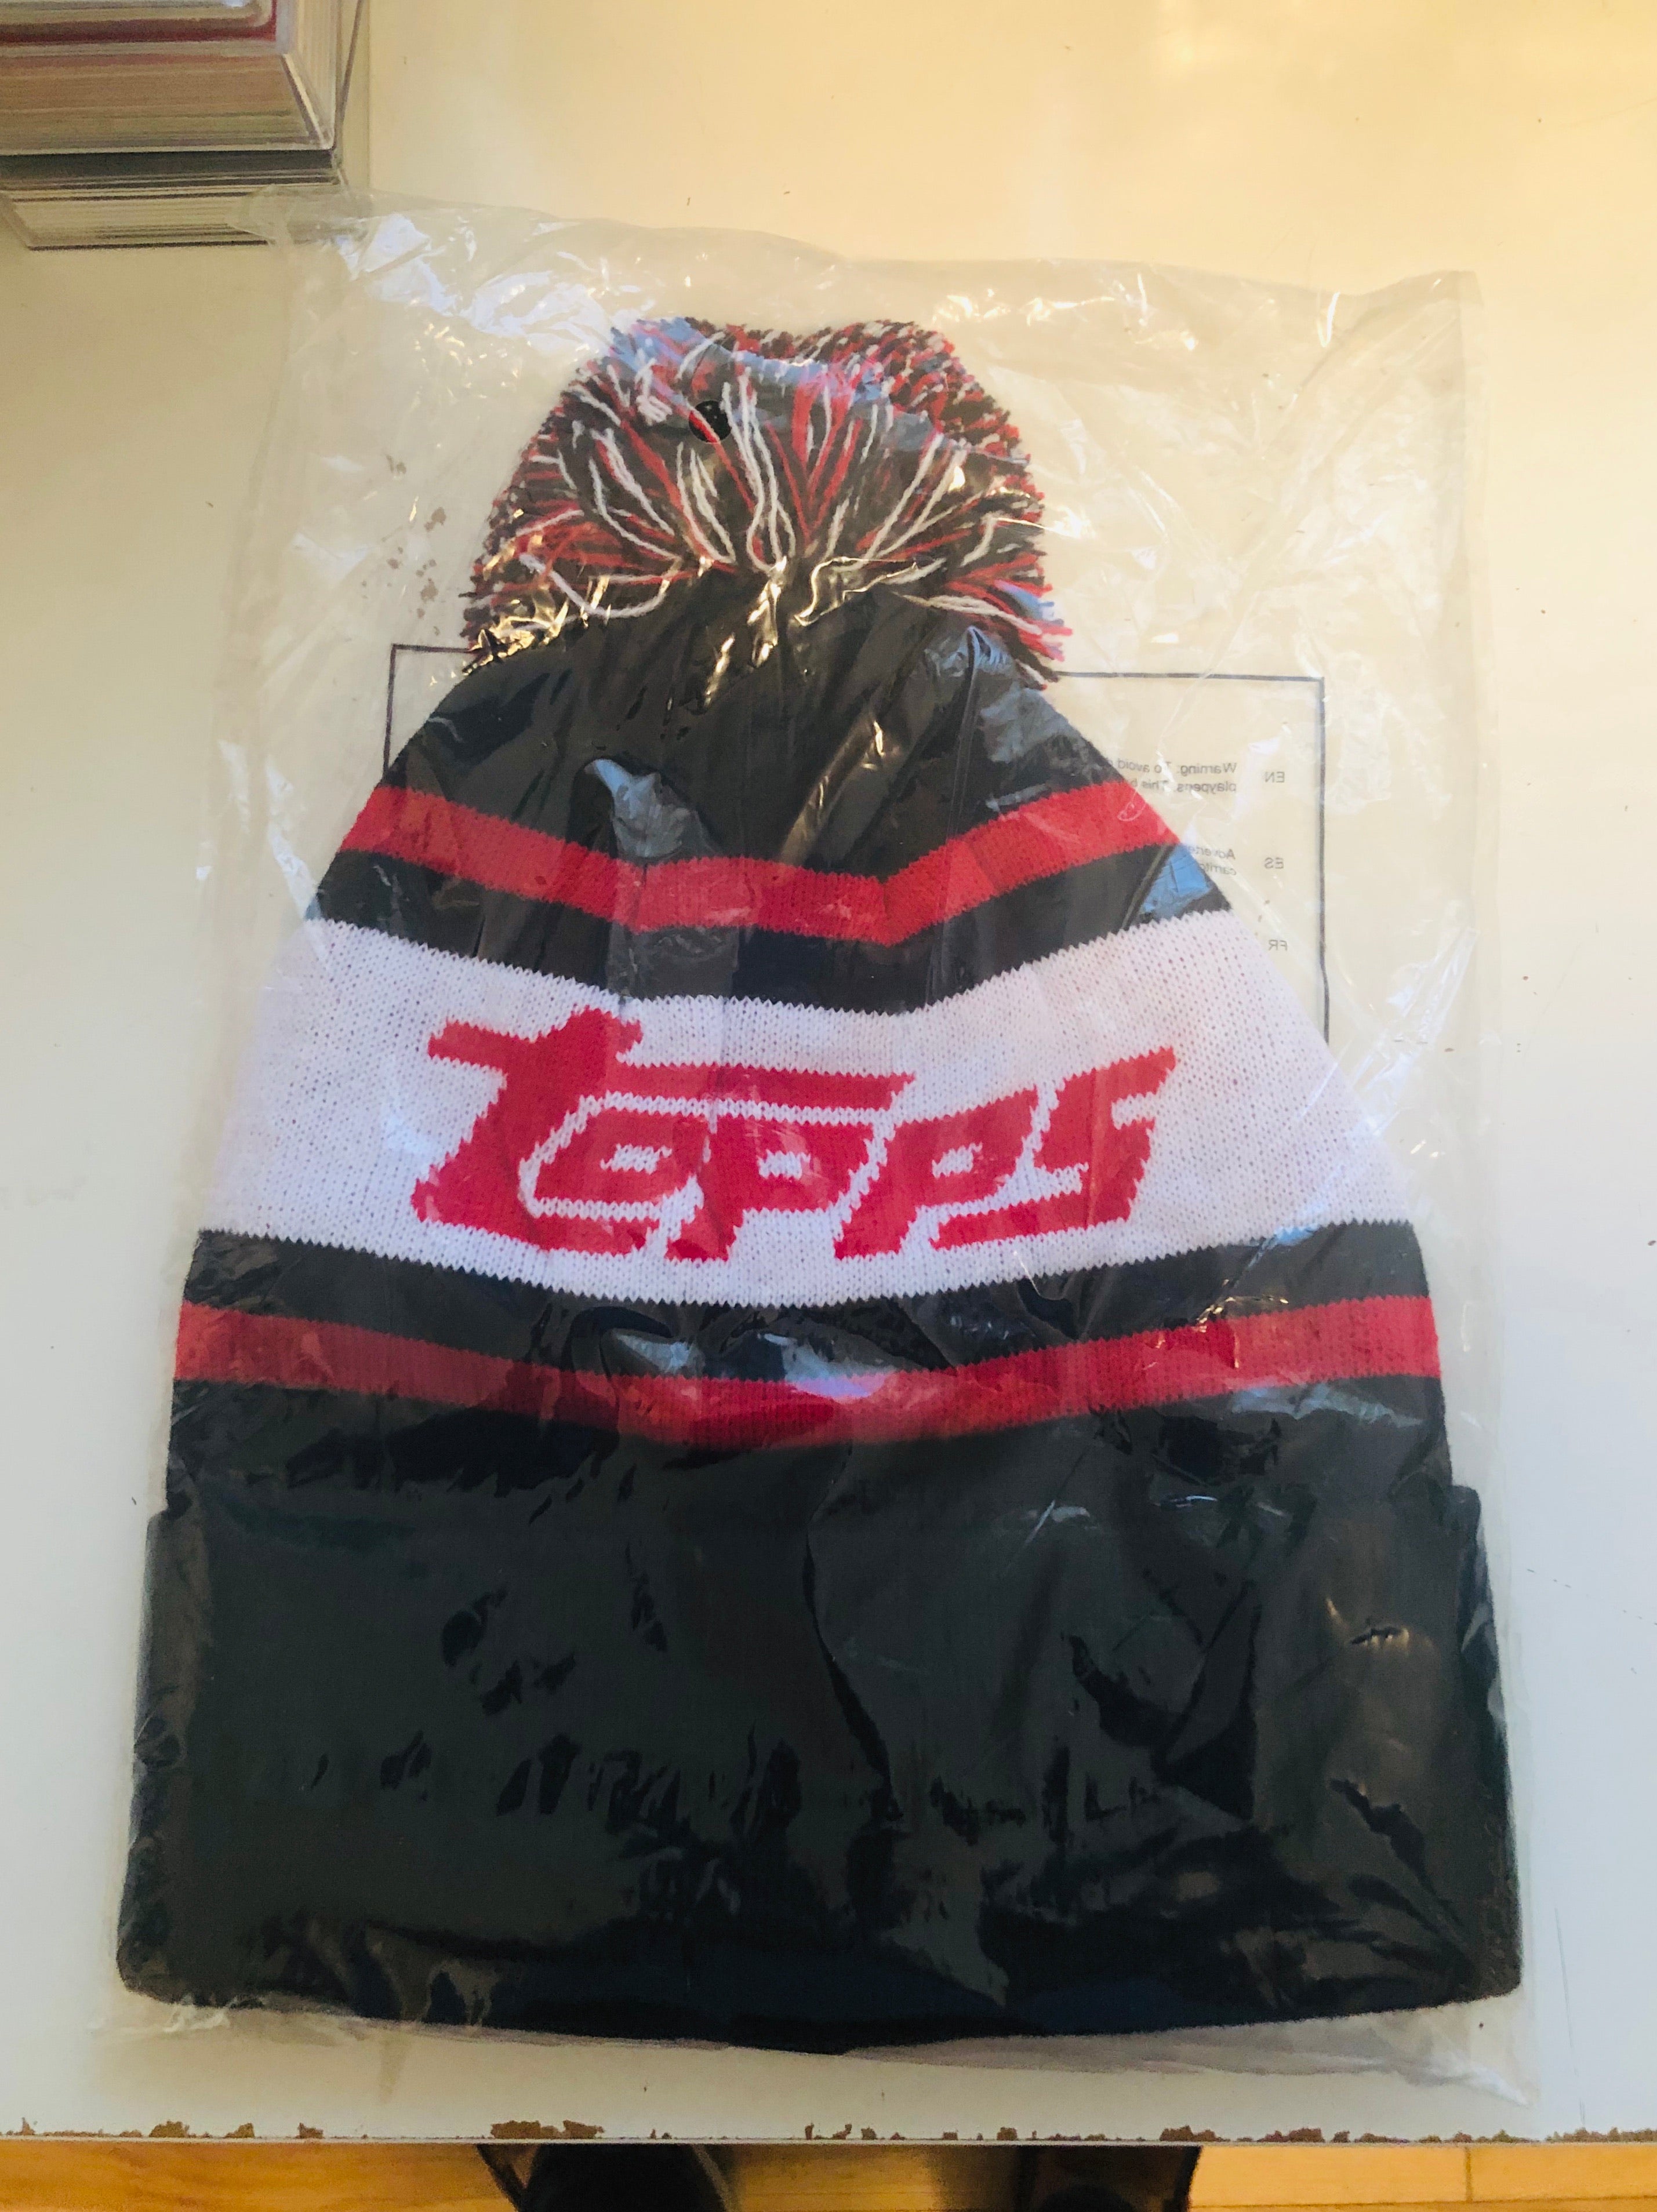 Topps card company limited issued winter touque hat